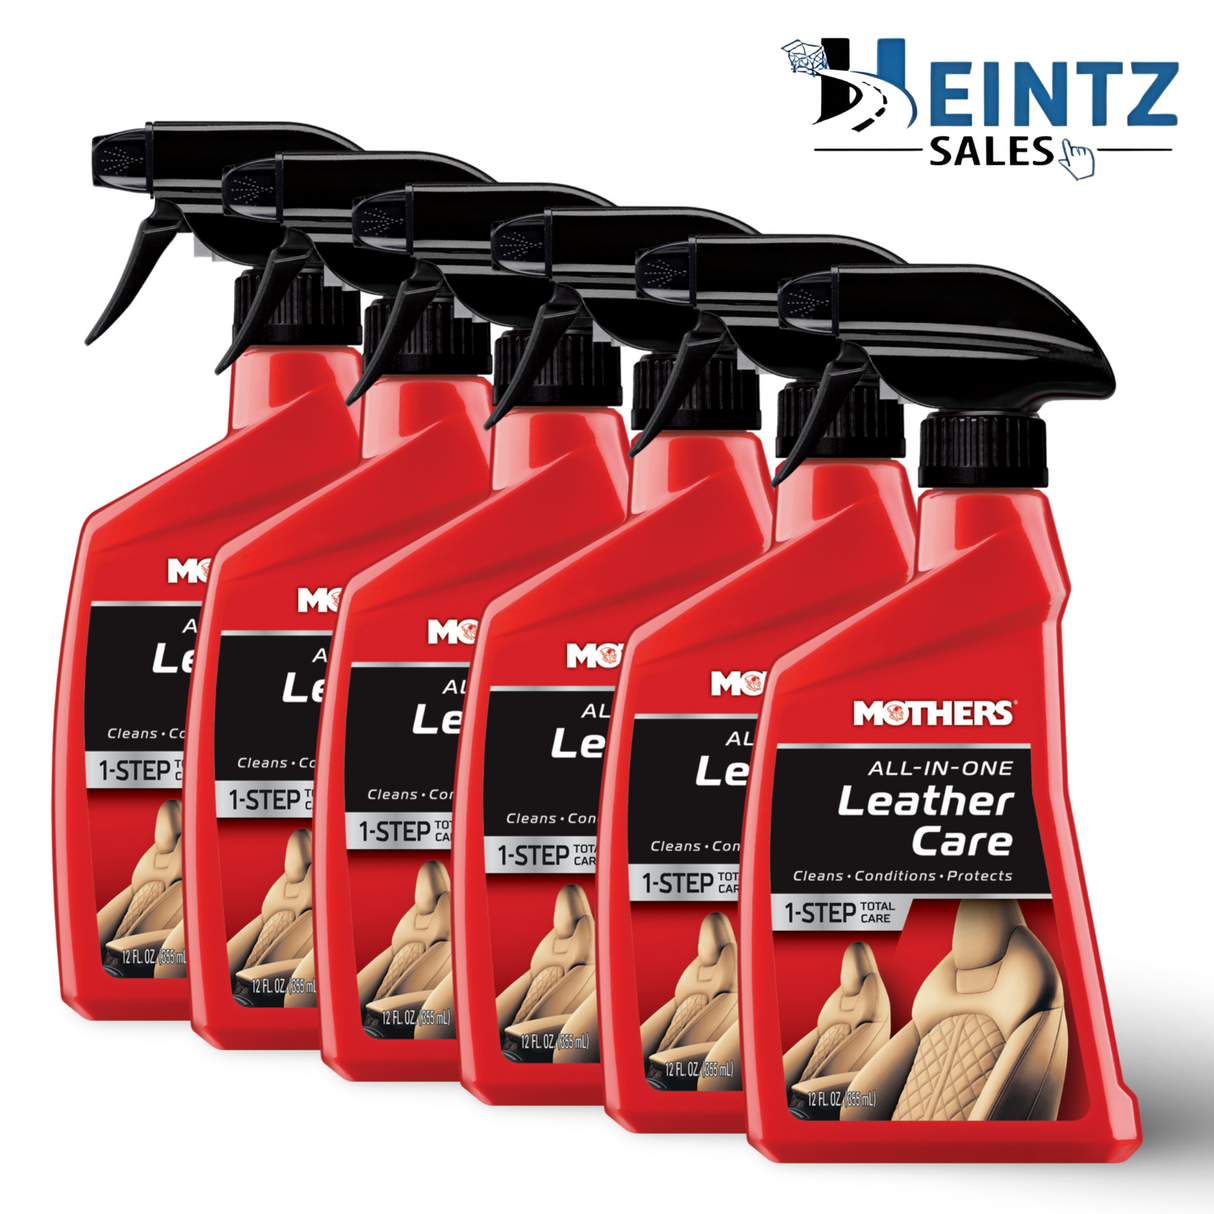 MOTHERS 06512 All-In-One Leather Care 6 PACK - Condition & Protect - Lift Dirt -12 oz.